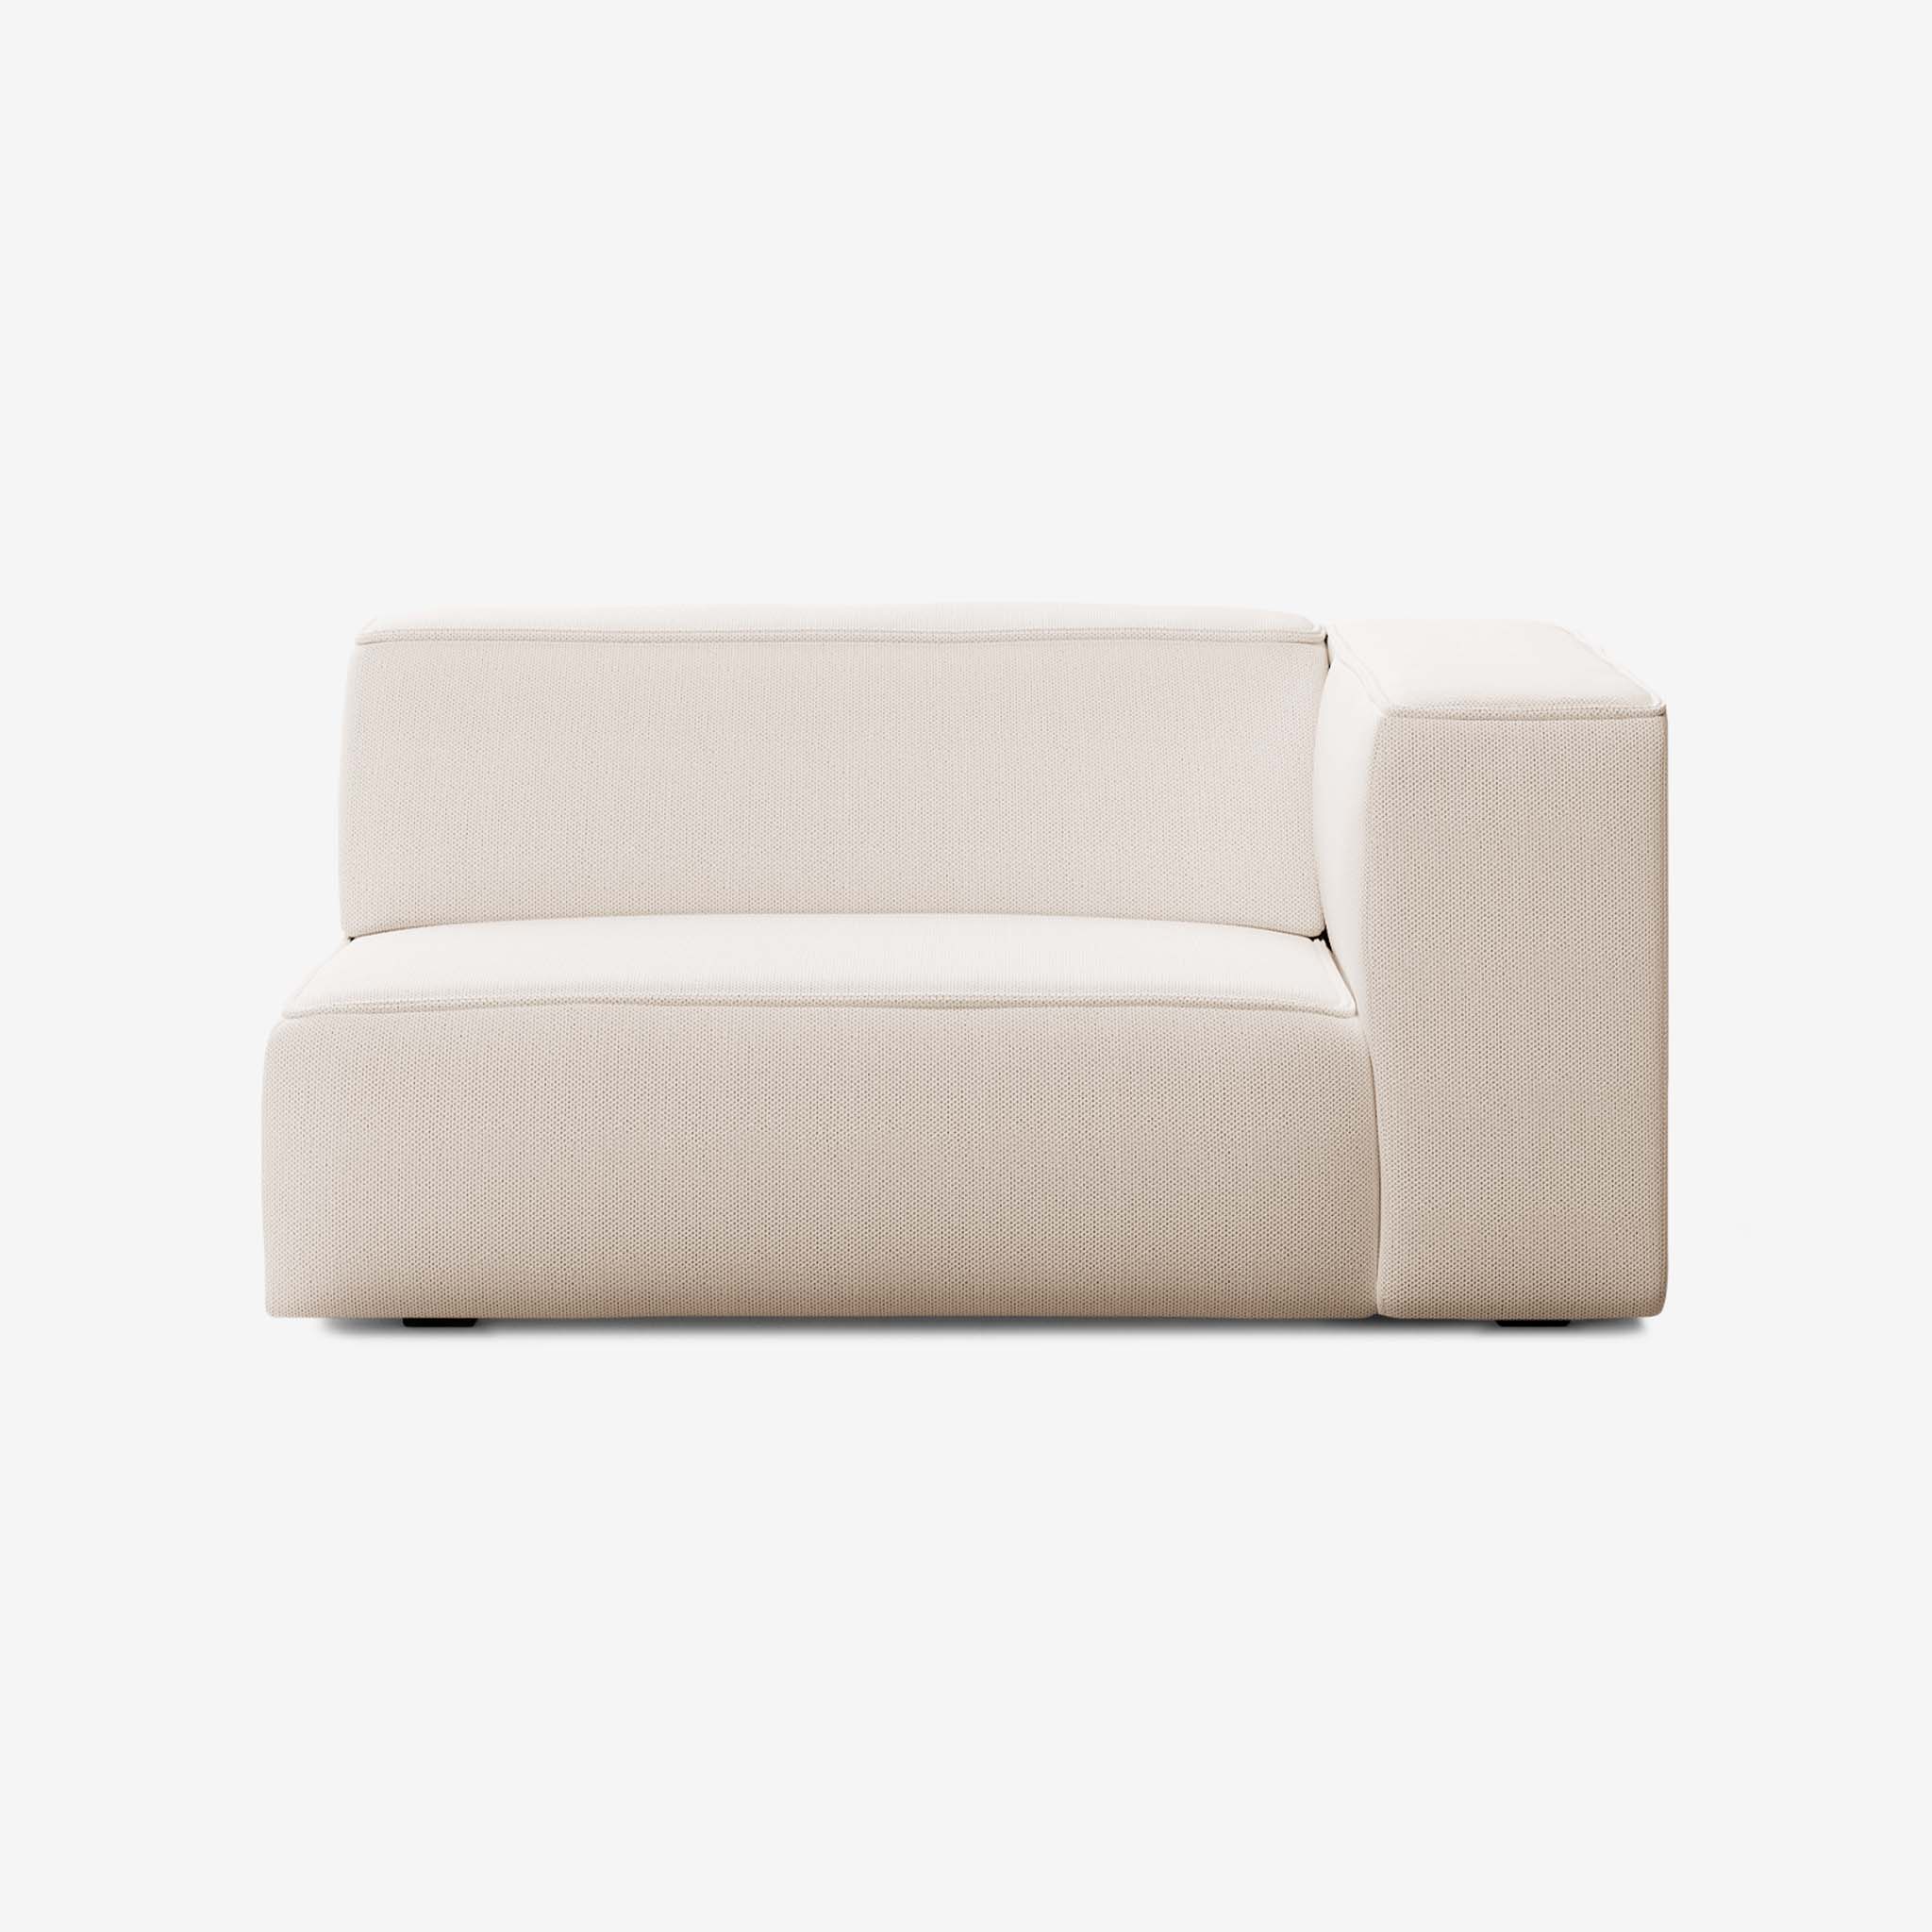 Meester Sofa 2 Seater Armrest Right